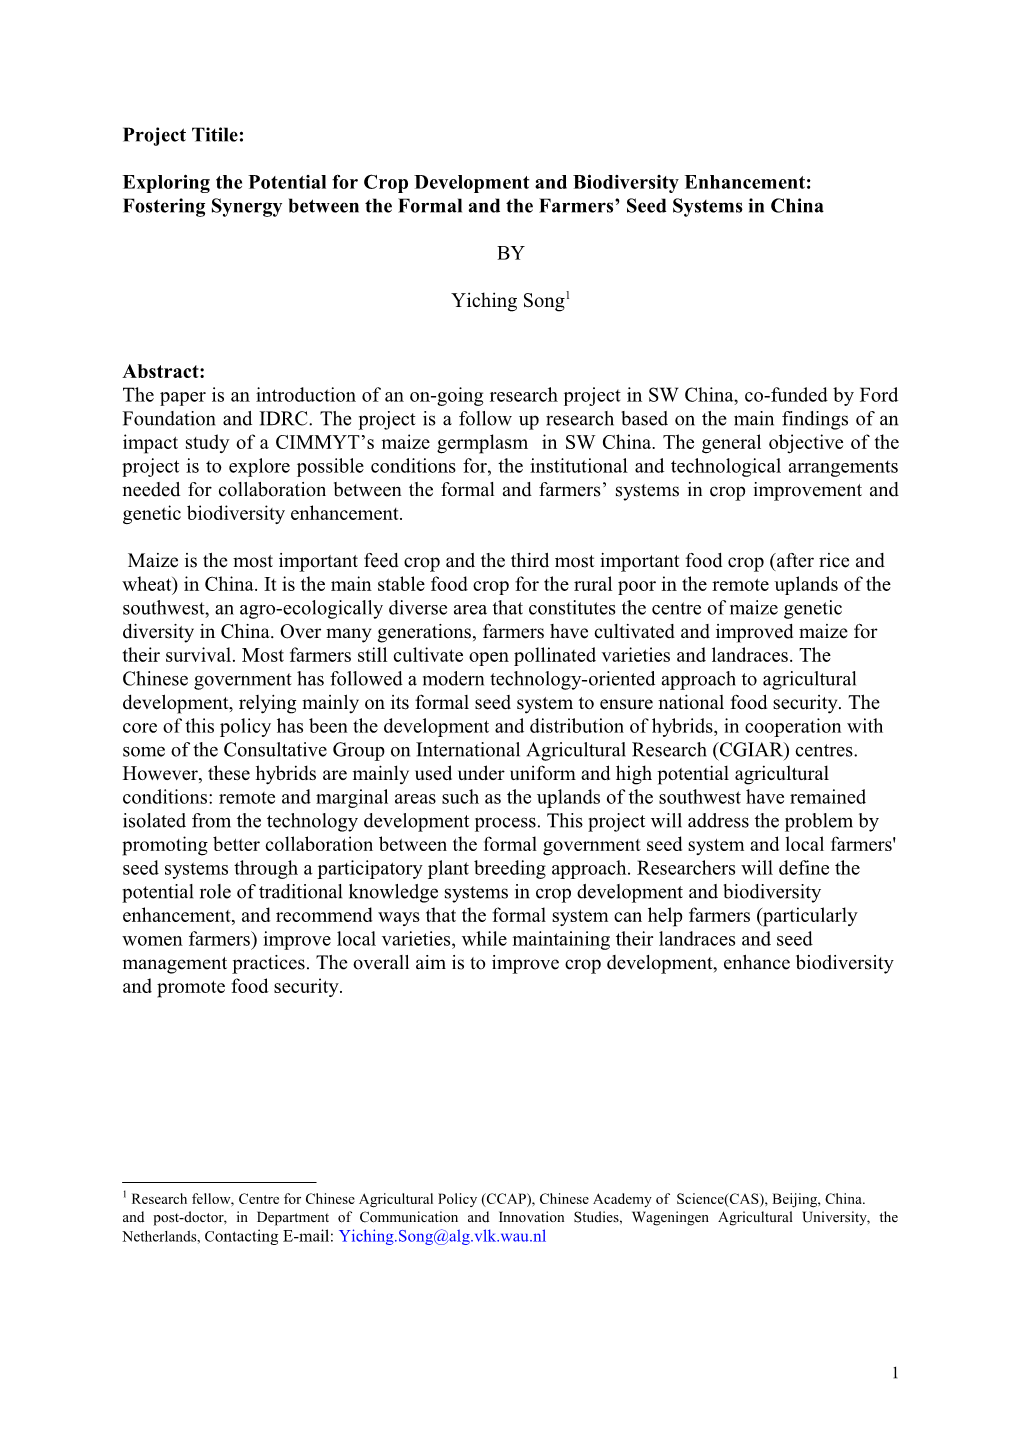 Abstract: Song, Yiching. New Seed in Old China: Impact Study of CIMMYT S Collabourative